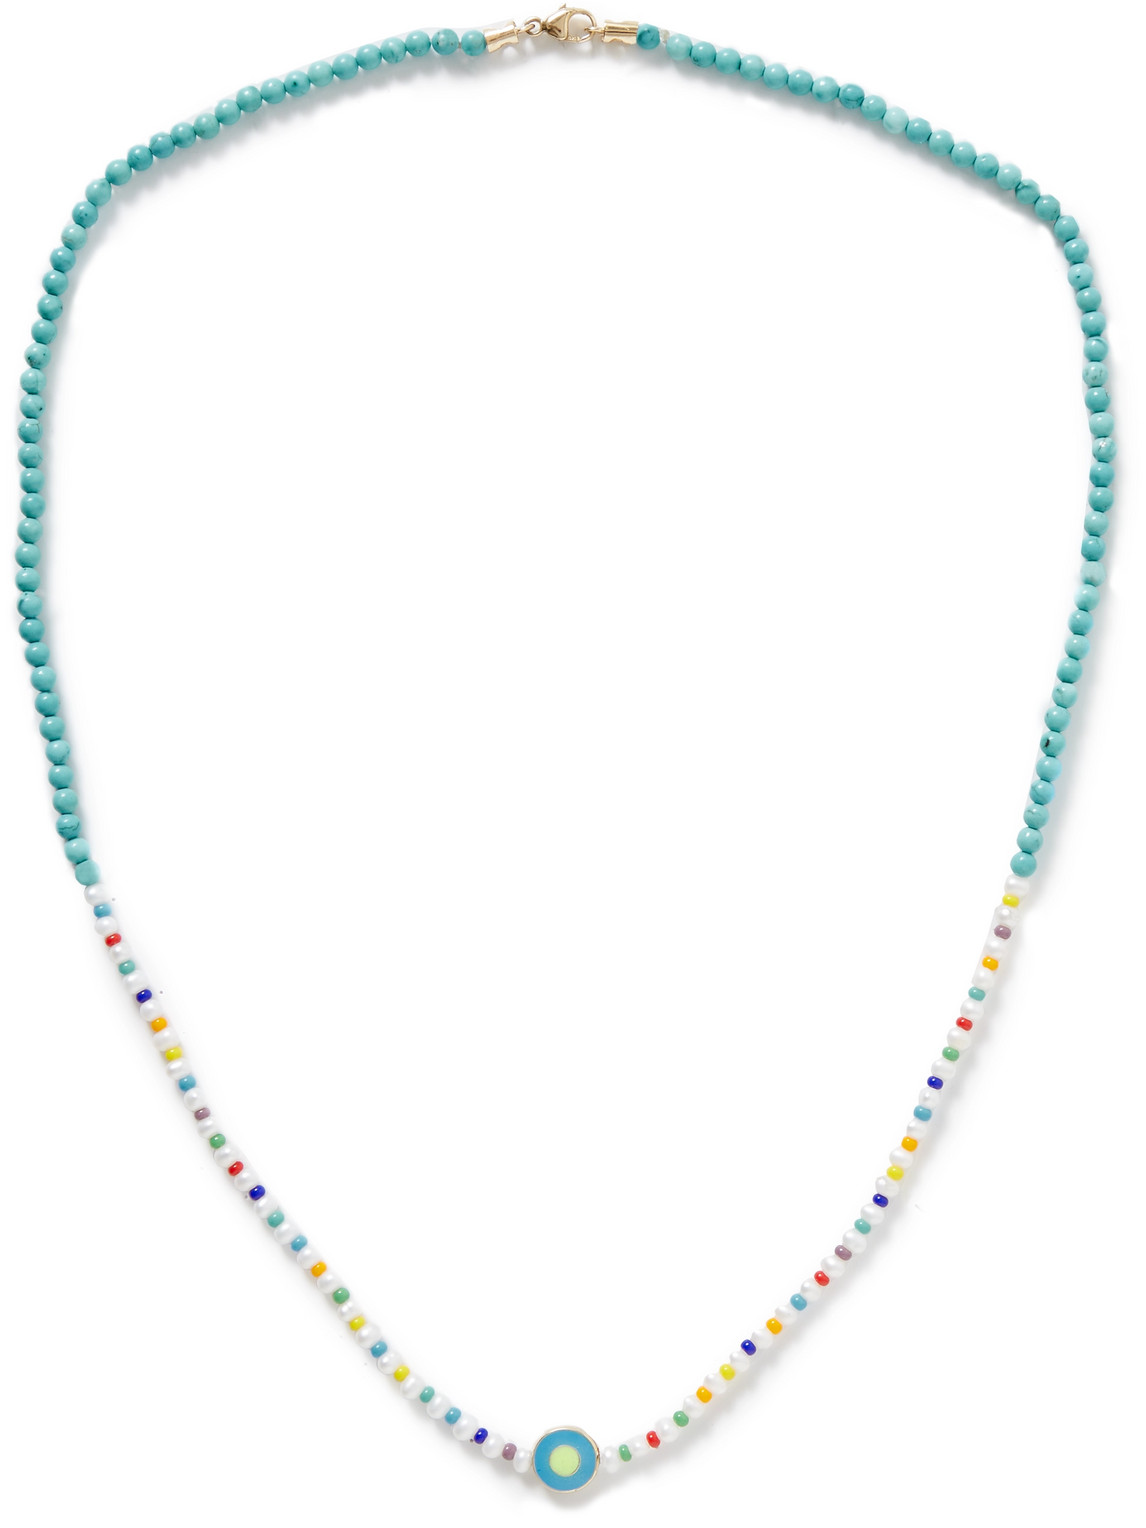 Luis Morais Gold, Enamel, Glass And Pearl Beaded Necklace In Blue